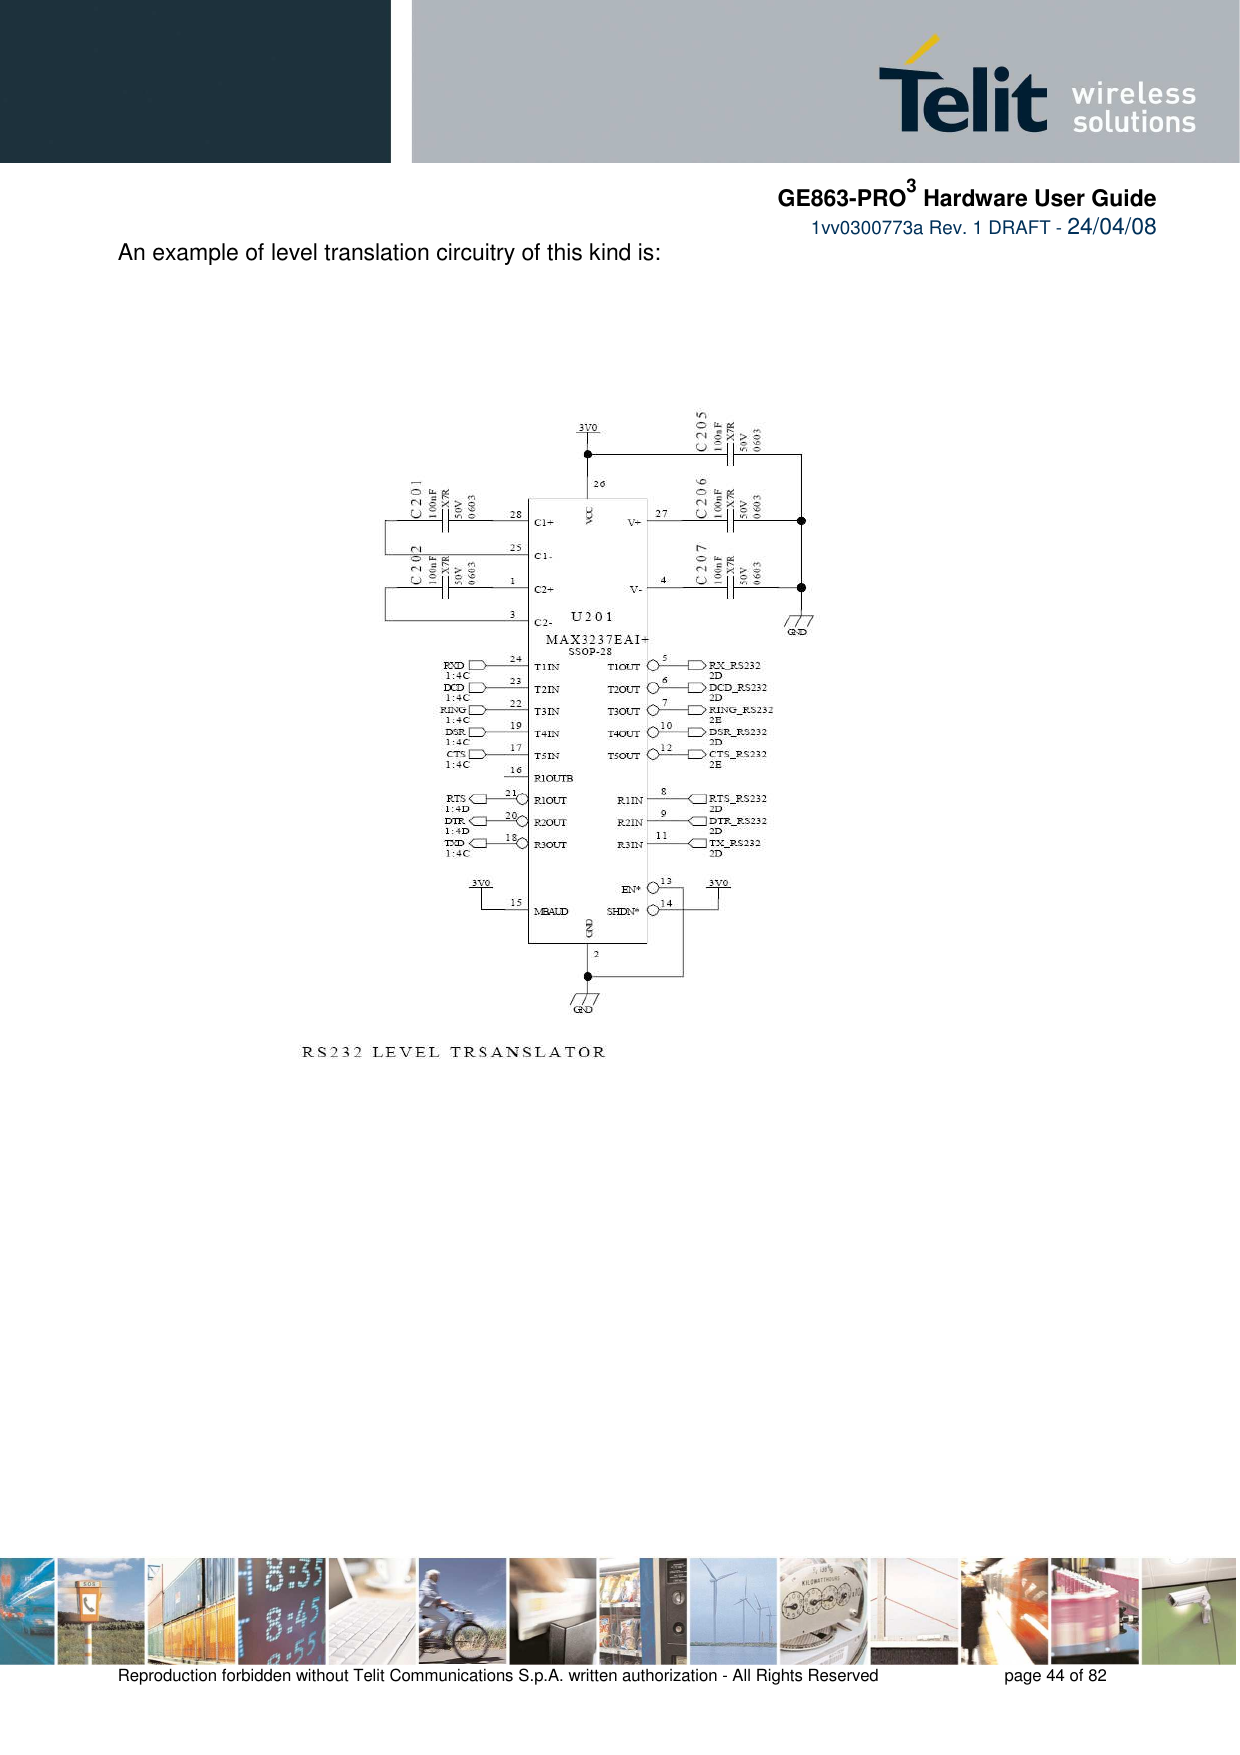     GE863-PRO3 Hardware User Guide  1vv0300773a Rev. 1 DRAFT - 24/04/08    Reproduction forbidden without Telit Communications S.p.A. written authorization - All Rights Reserved    page 44 of 82  An example of level translation circuitry of this kind is:    